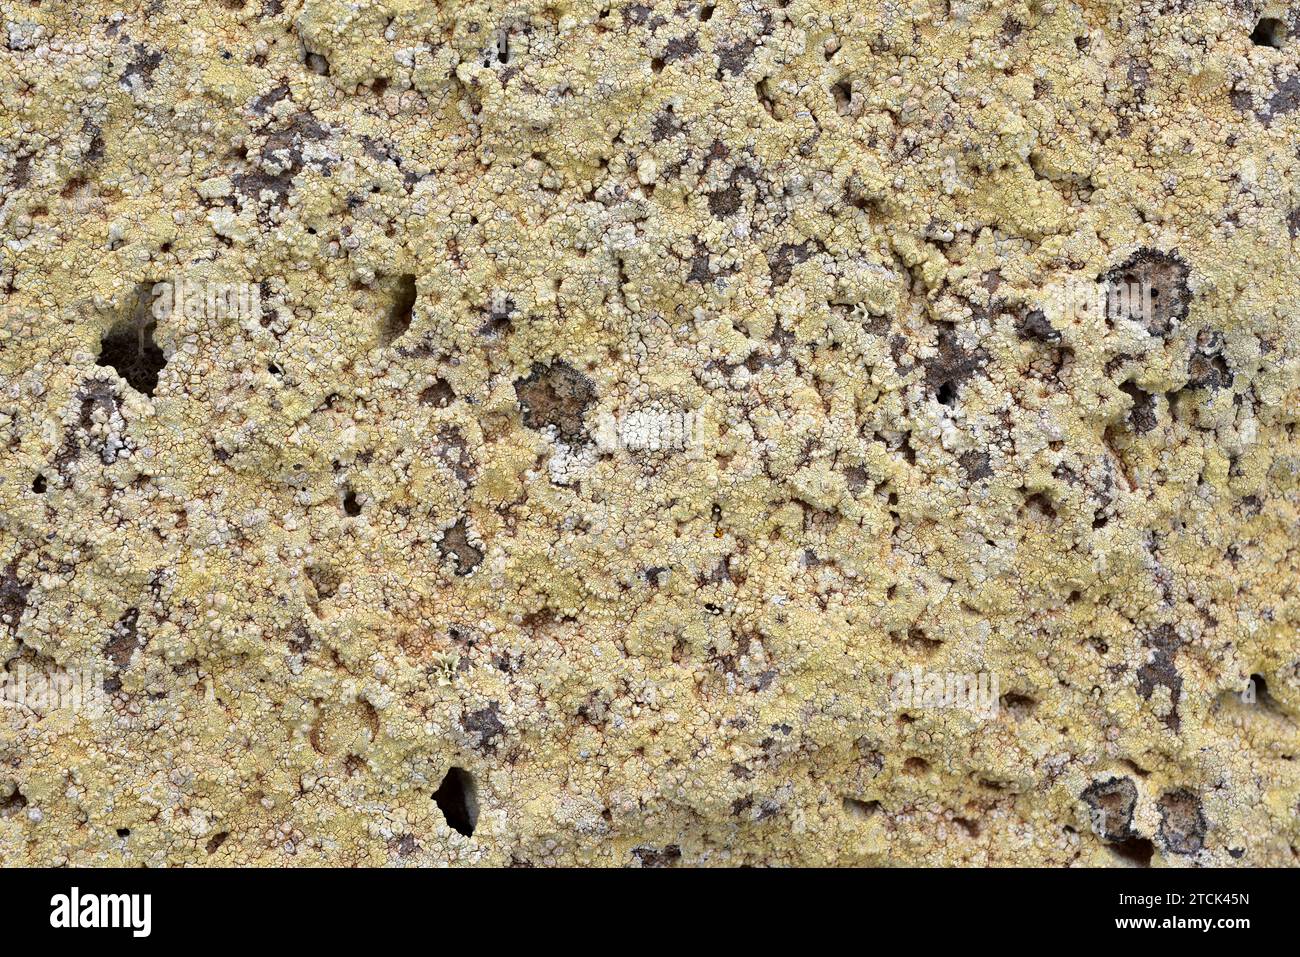 Pertusaria pluripuncta is a crustose lichen. This photo was taken in Lanzarote Island, Canary Islands, Spain. Stock Photo